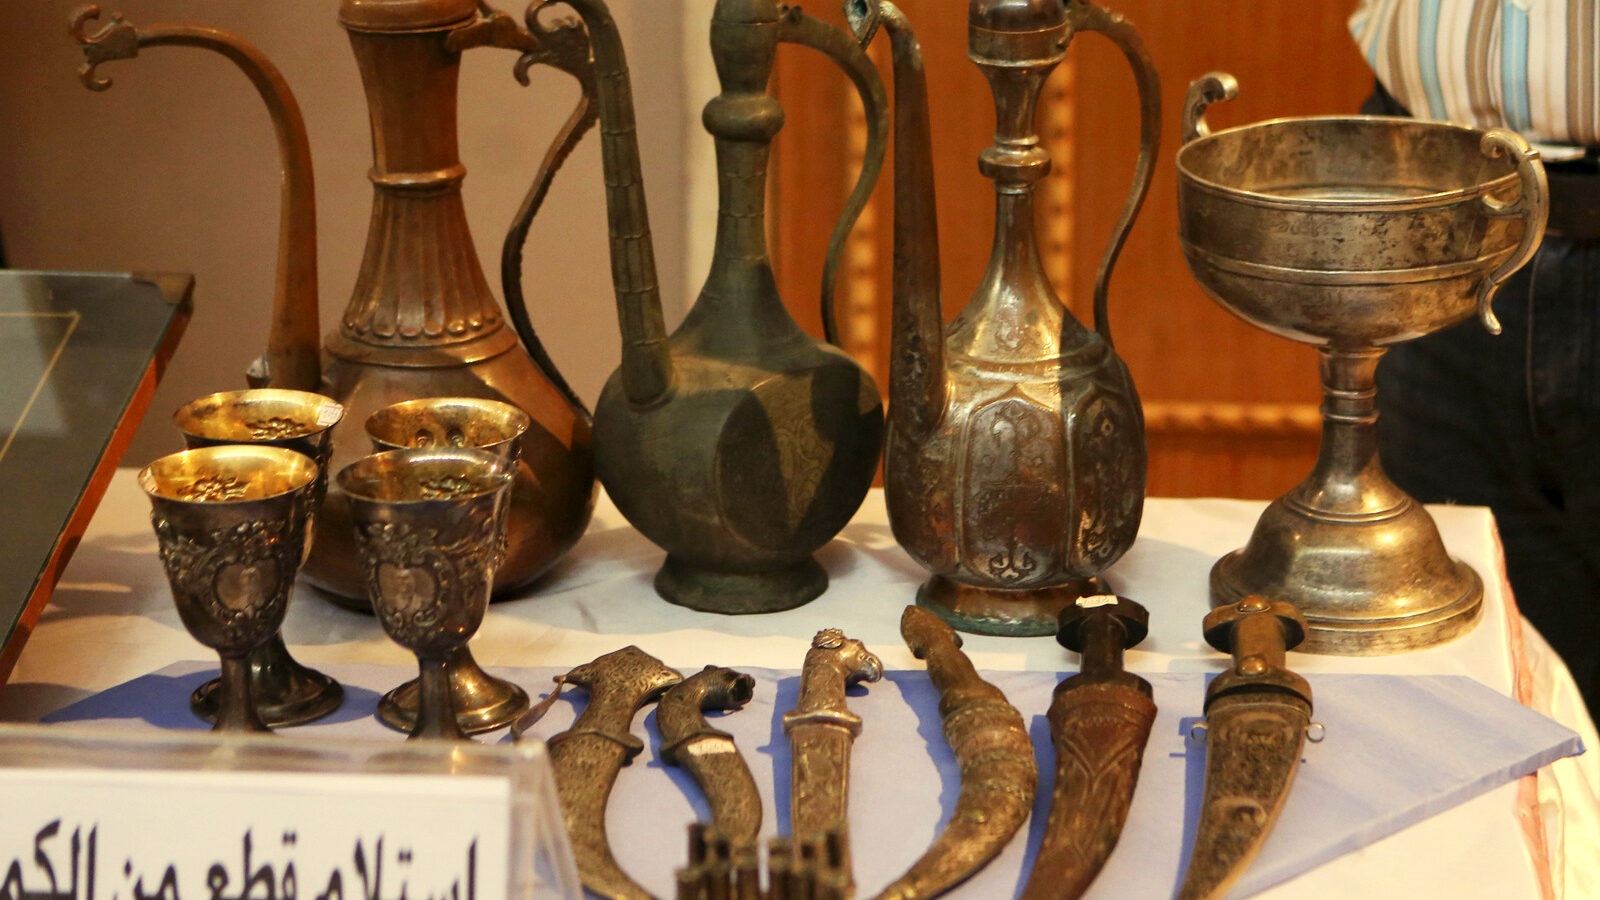 Recovered antiquities are displayed at the Iraqi National Museum in Baghdad, Iraq, Wednesday, July 29, 2015. Nearly 400 artifacts looted from Iraq amid the chaos of the 2003 U.S.-led invasion that toppled former Iraqi President Saddam Hussein were recovered by the Iraqi authorities recently from several sources. (AP Photo/Khalid Mohammed)